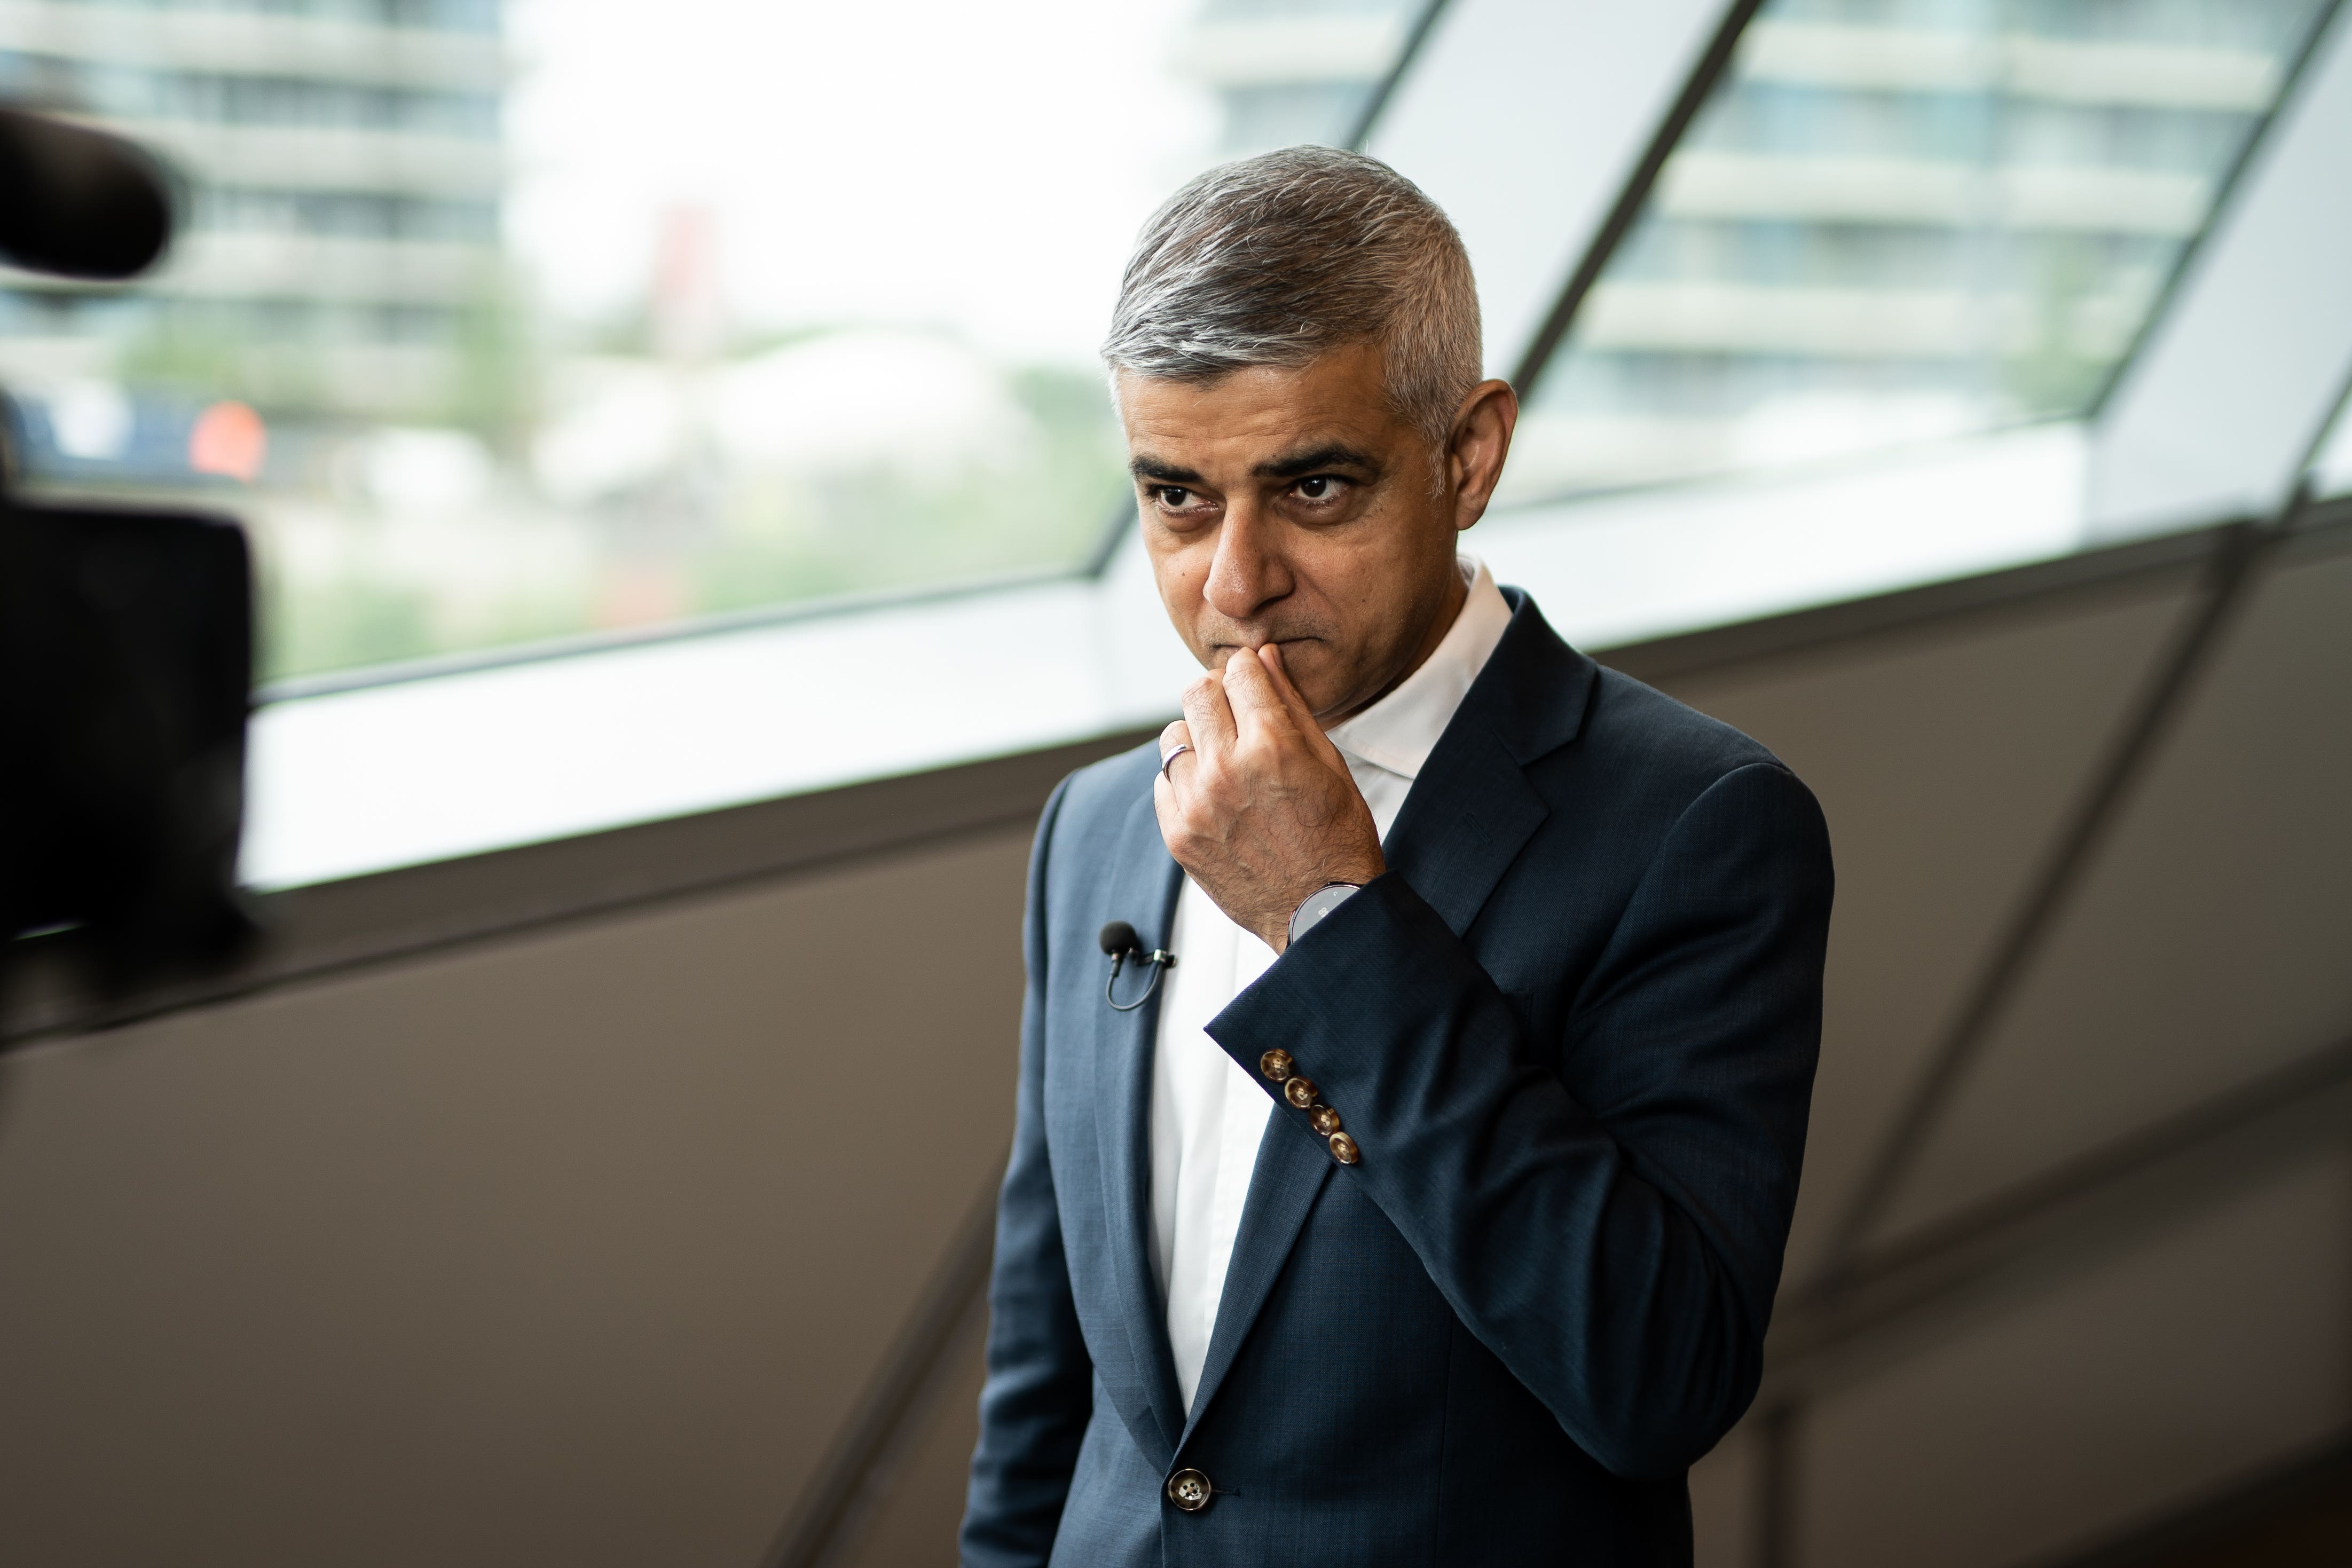 Mayor of London Sadiq Khan says the decision to expand the zone was difficult but necessary